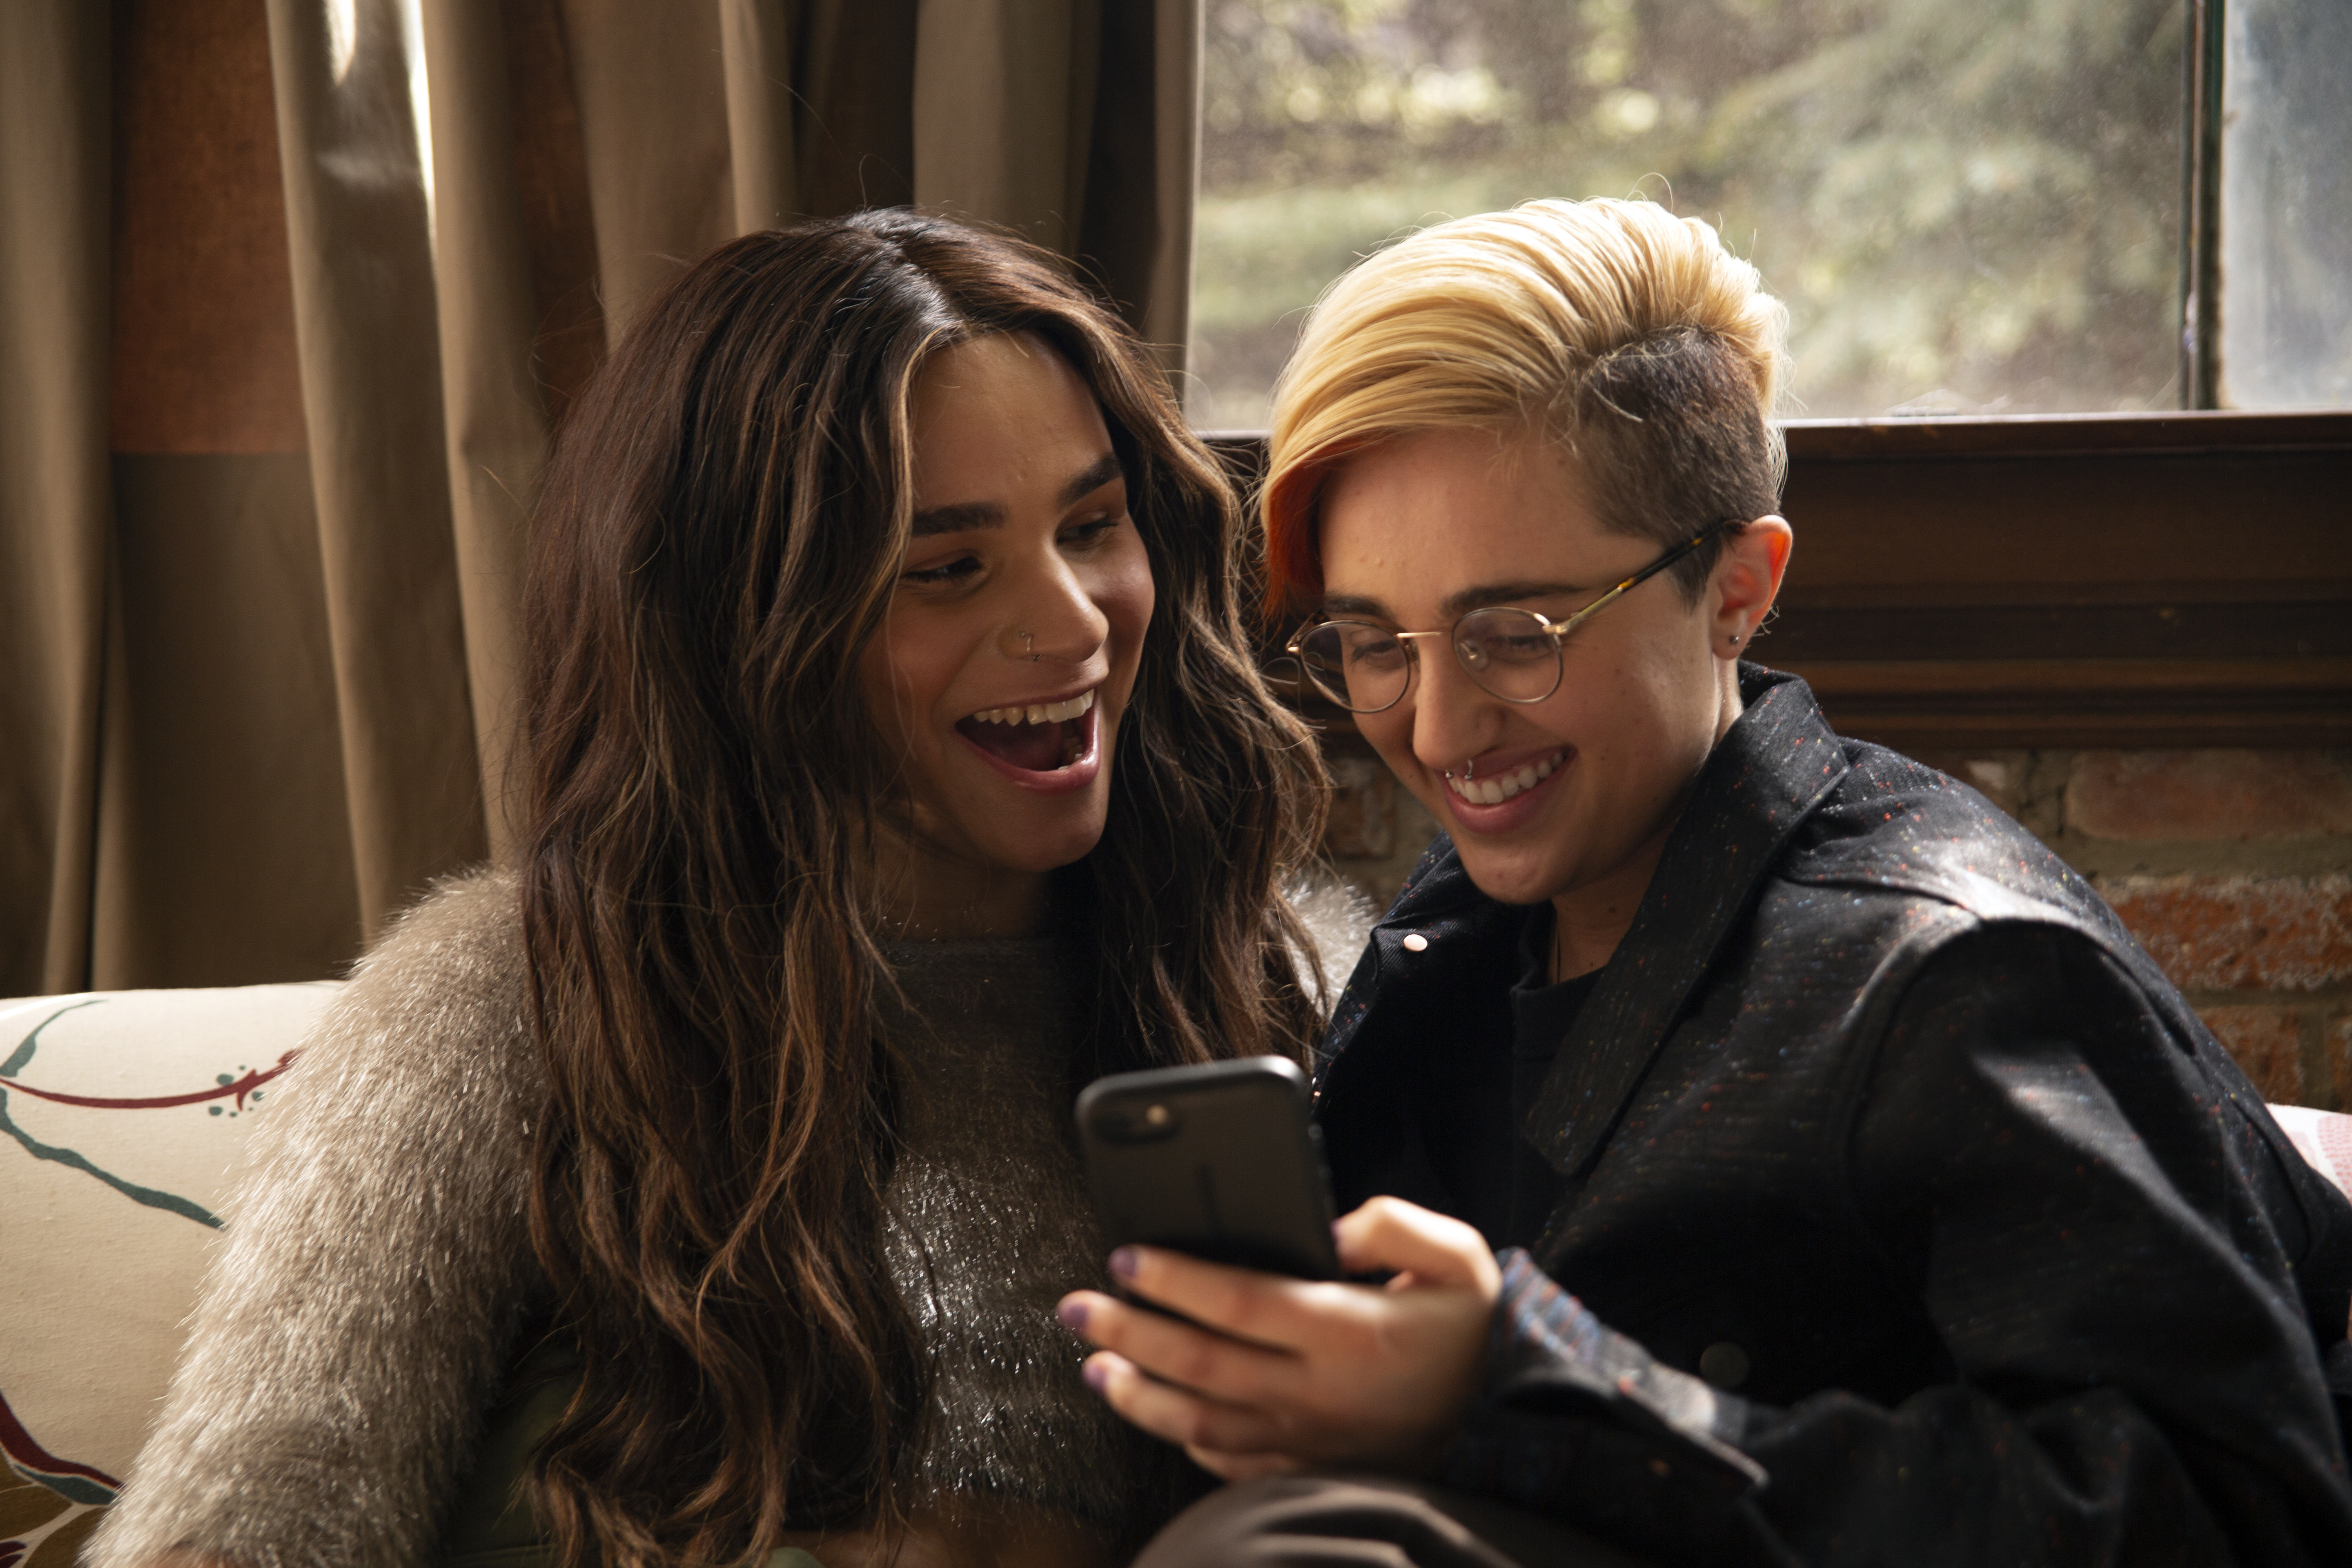 A transfeminine non-binary person and transmasculine gender-nonconforming person laughing and looking at a phone